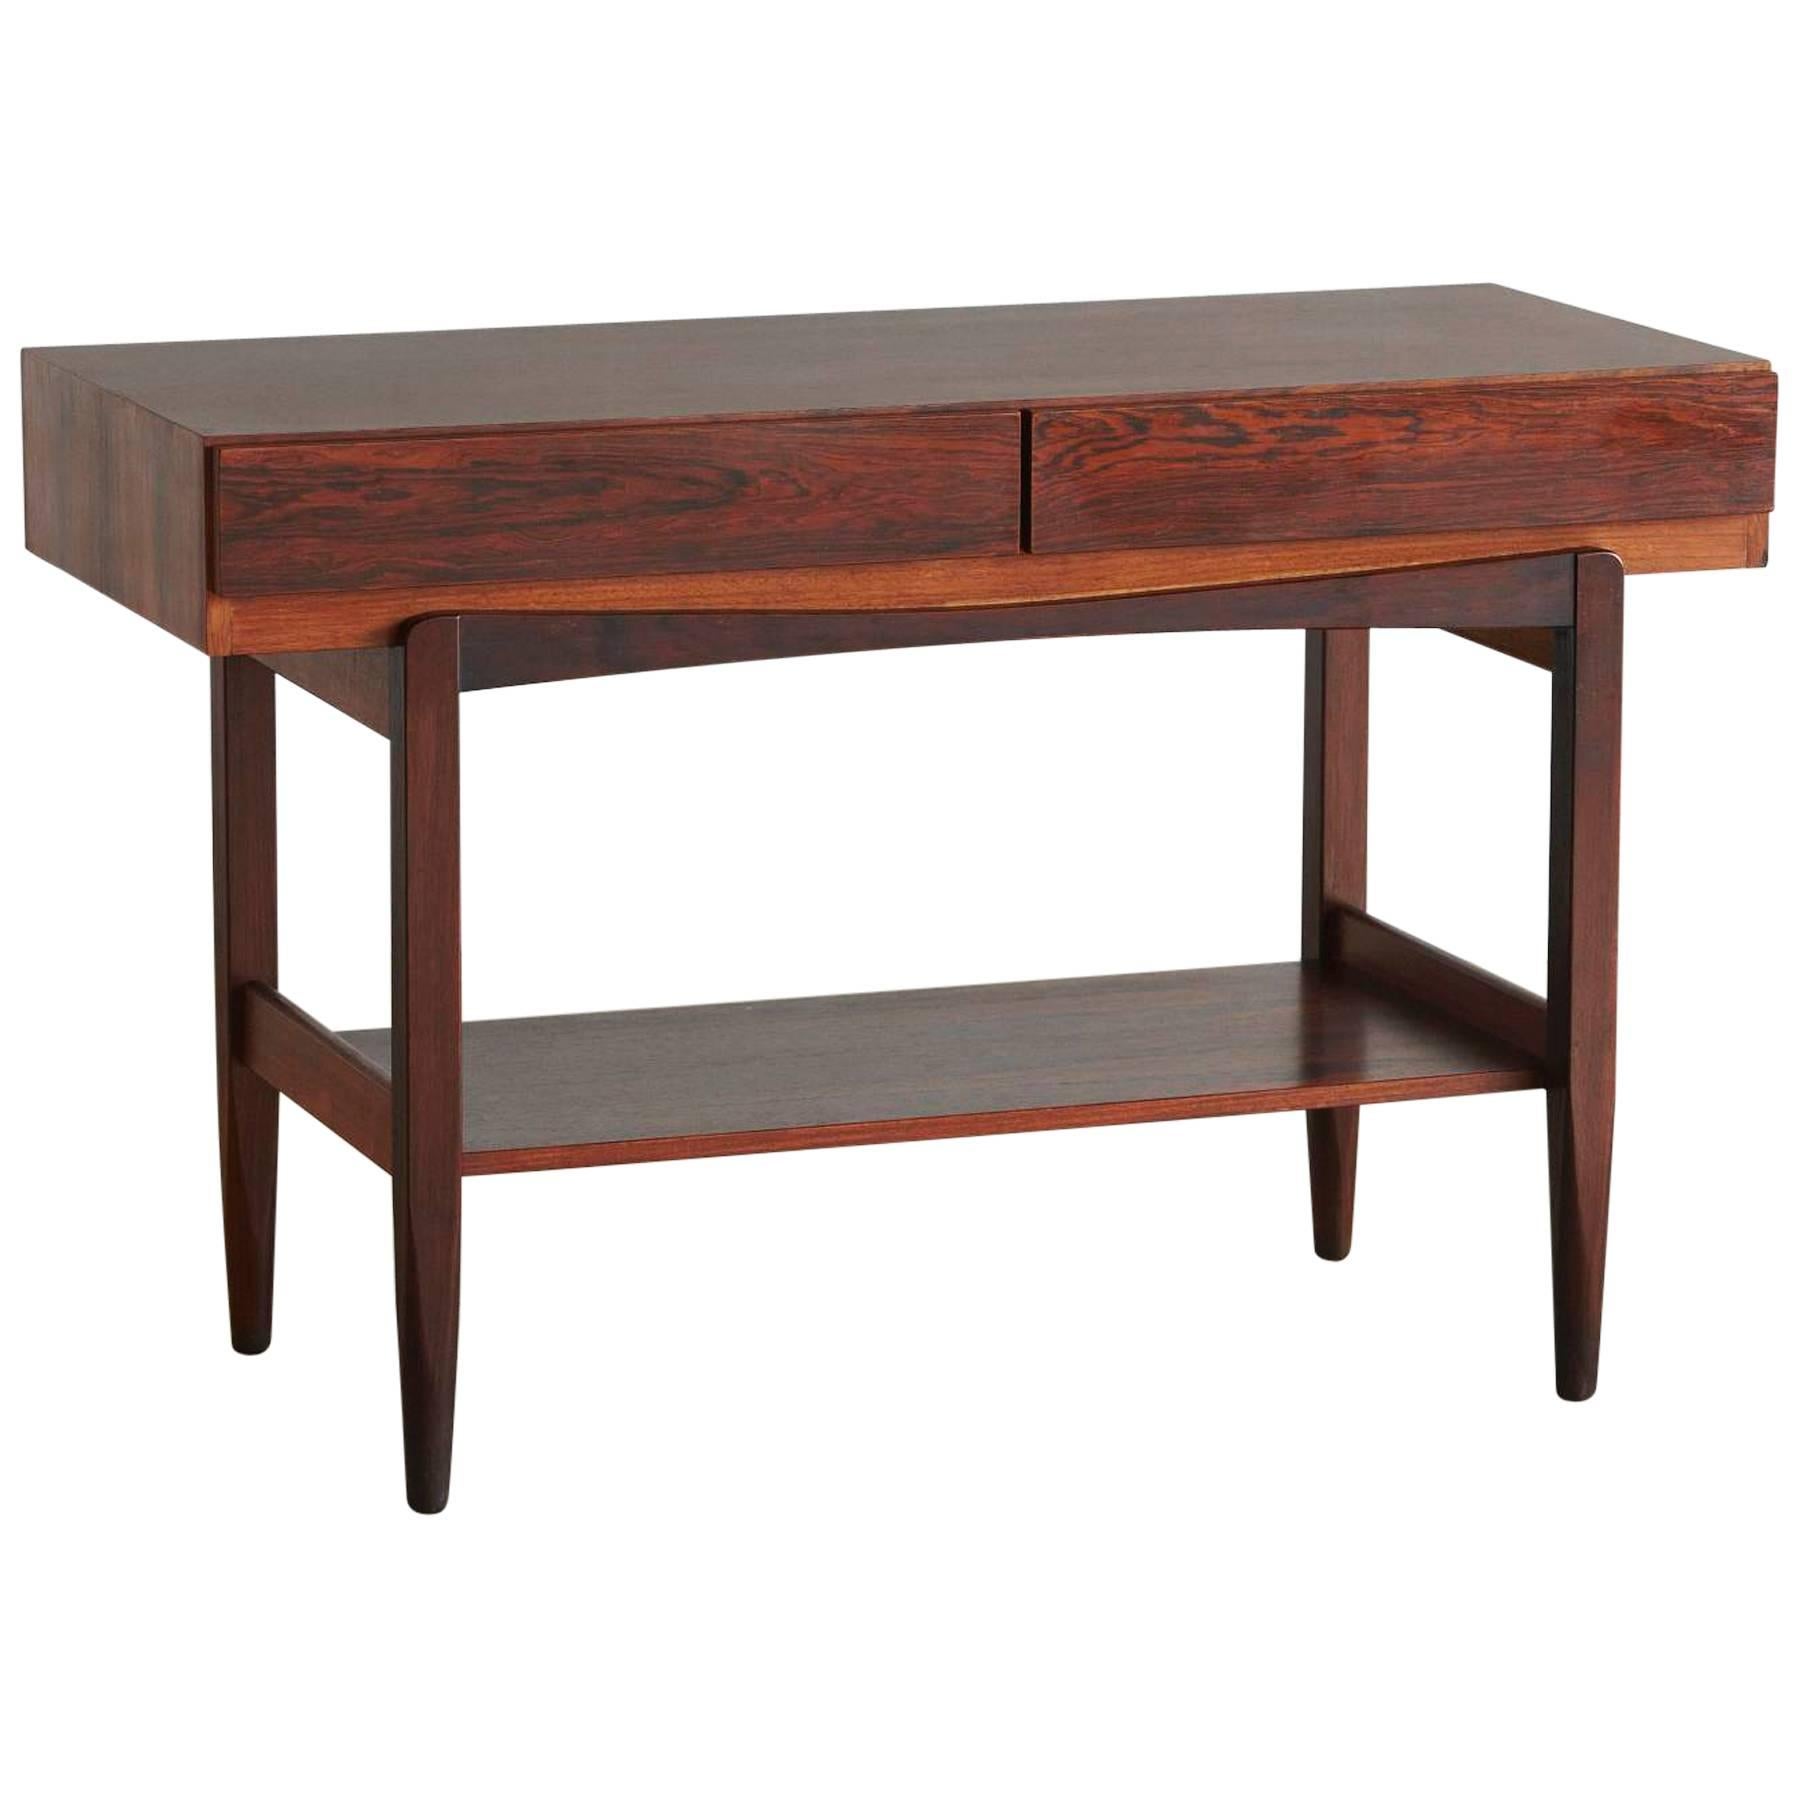 Rosewood Console Table or Server by Ib Kofod Larsen